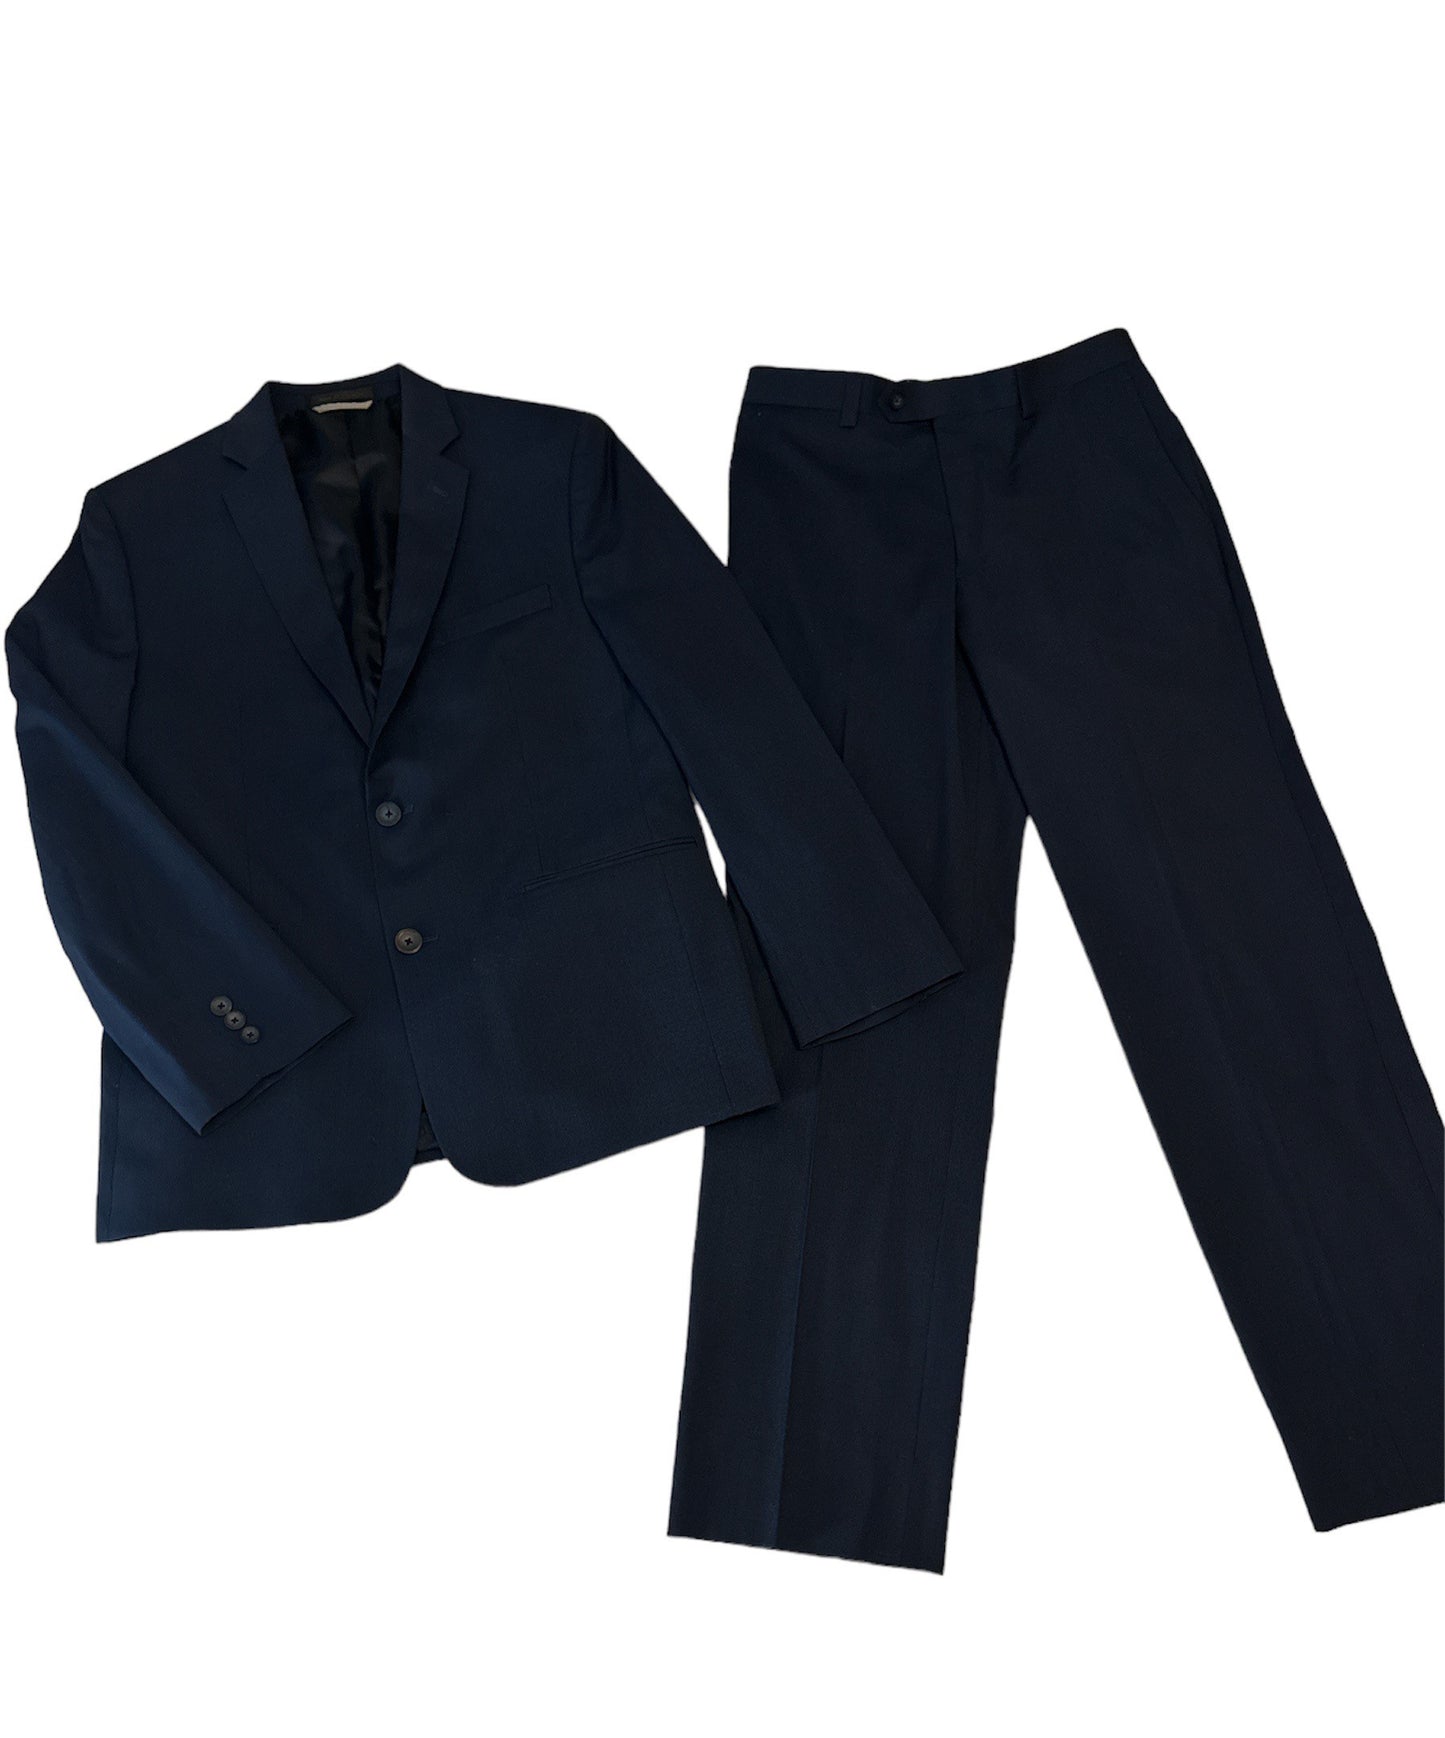 Marc New York Andrew Marc - Youth Boy’s 2pc Suit